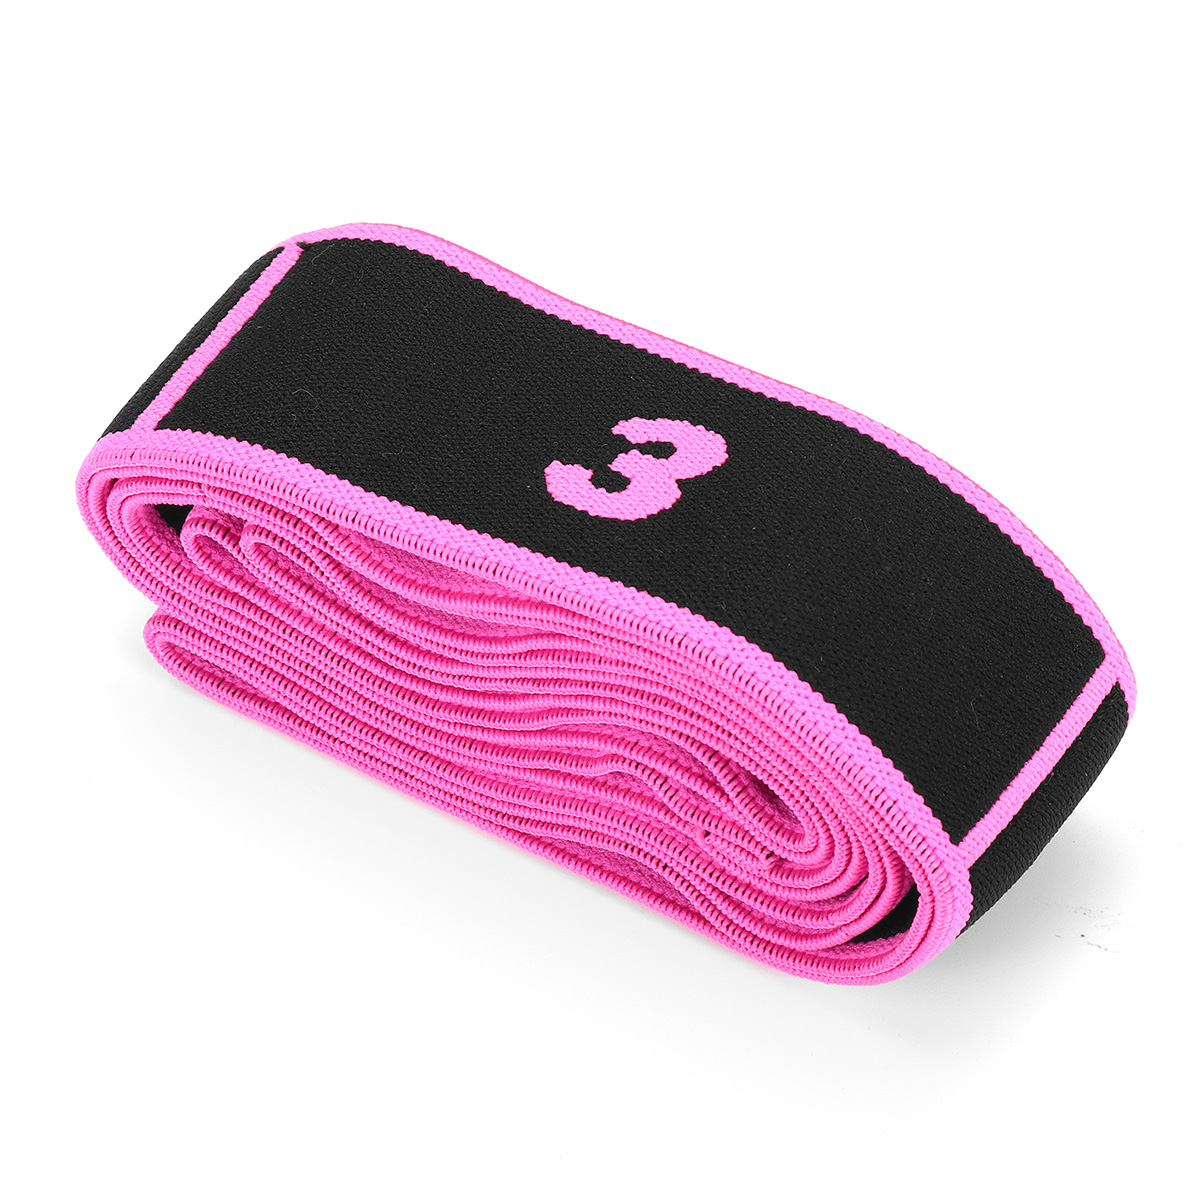 90*4 CM Resistance Bands Strength Training Harness Exercise Sport Fitness For Adults Children